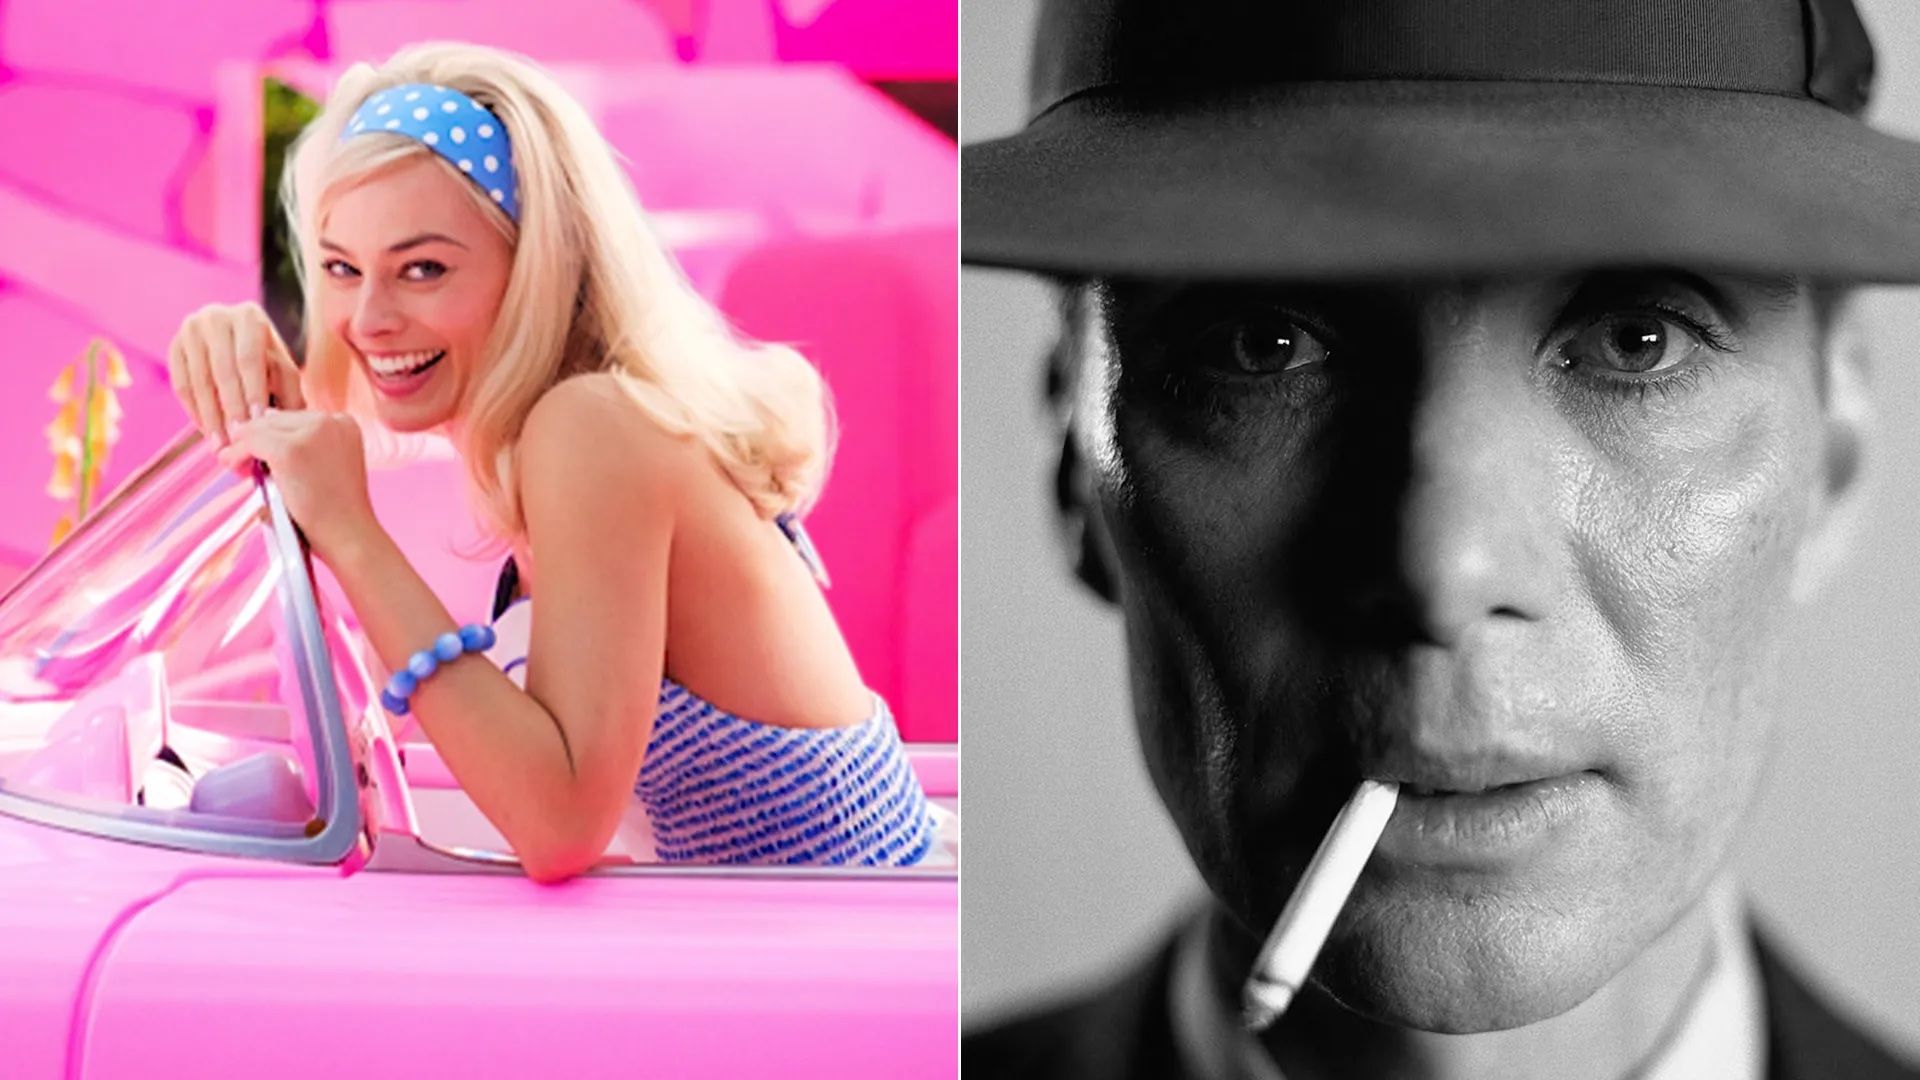 The Barbie and Oppenheimer posters